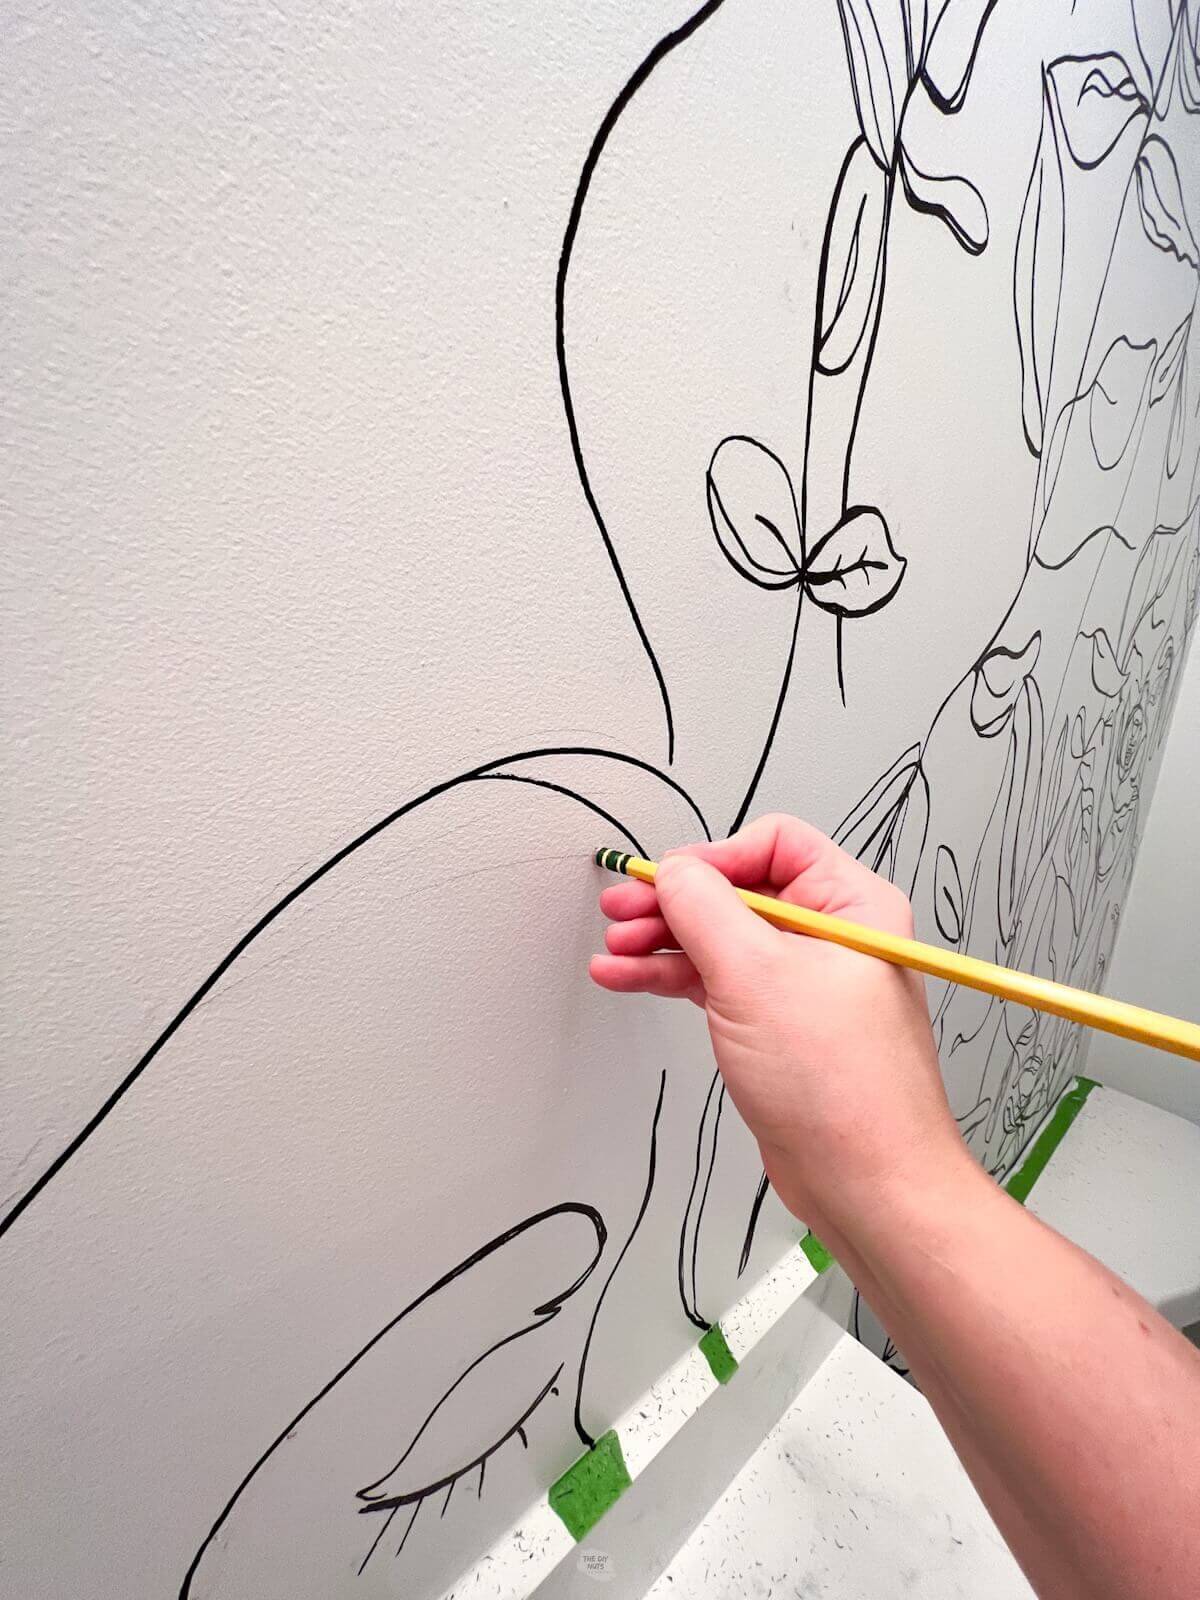 hand holding yellow pencil using eraser to erase pencil lines on white wall with black marker drawing on it.